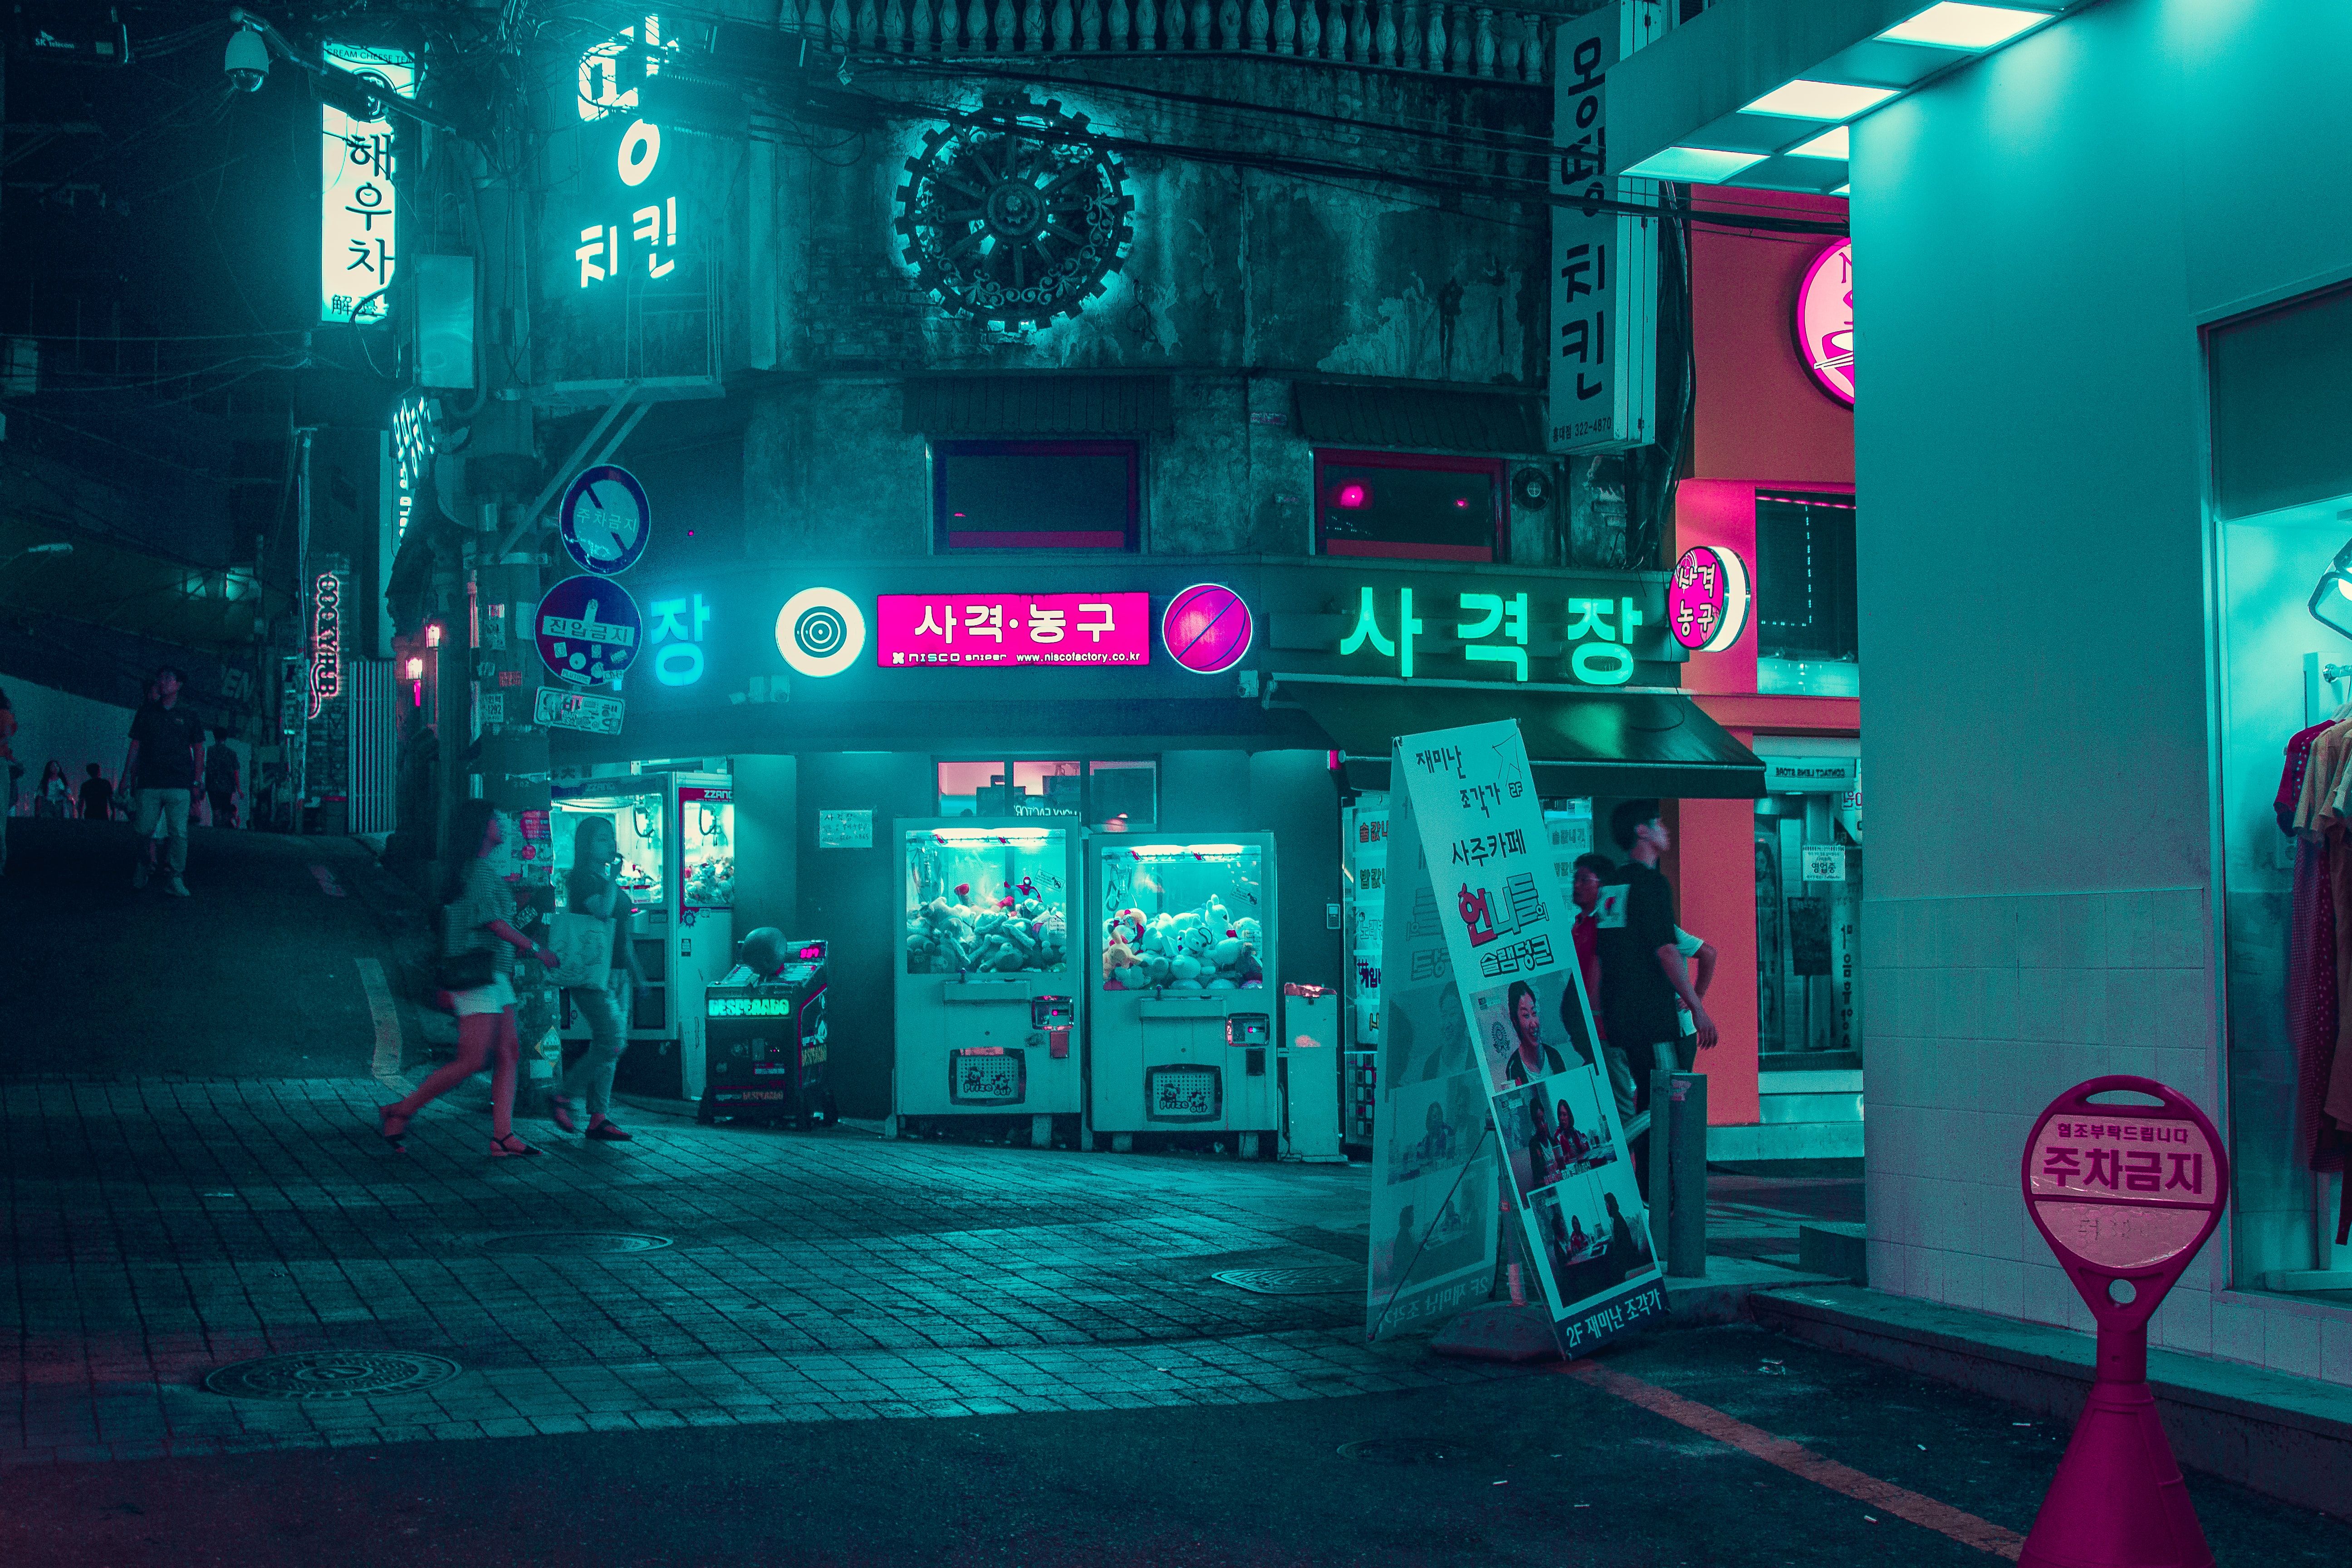 A street at night with vending machines and neon signs. - Seoul